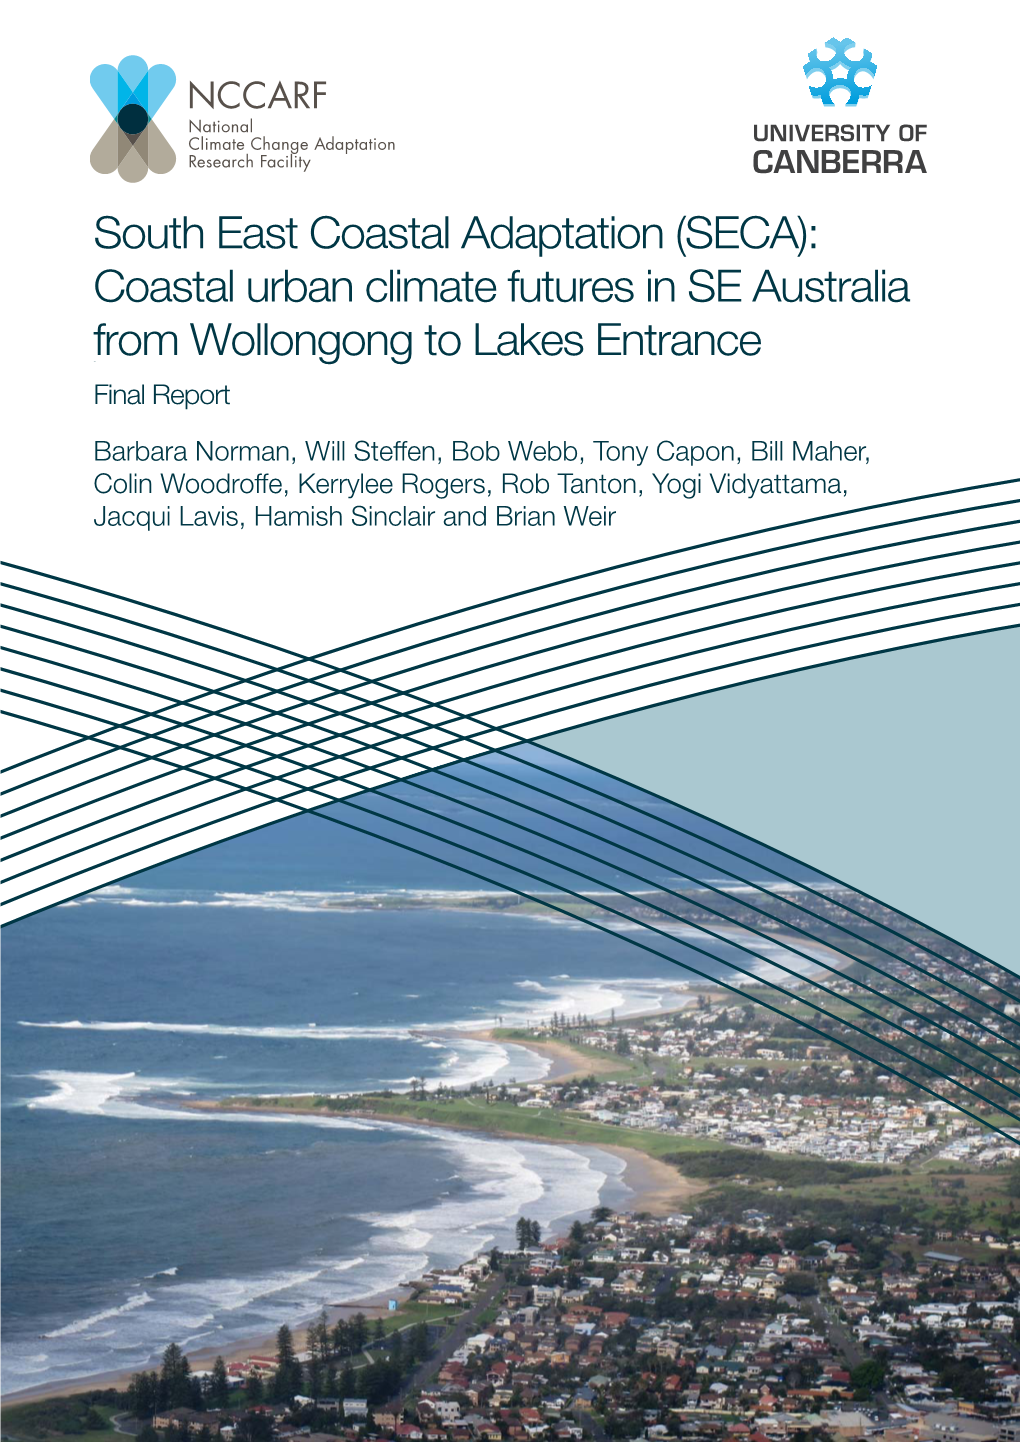 Coastal Urban Climate Futures in SE Australia from Wollongong to Lakes Entrance - Final Report